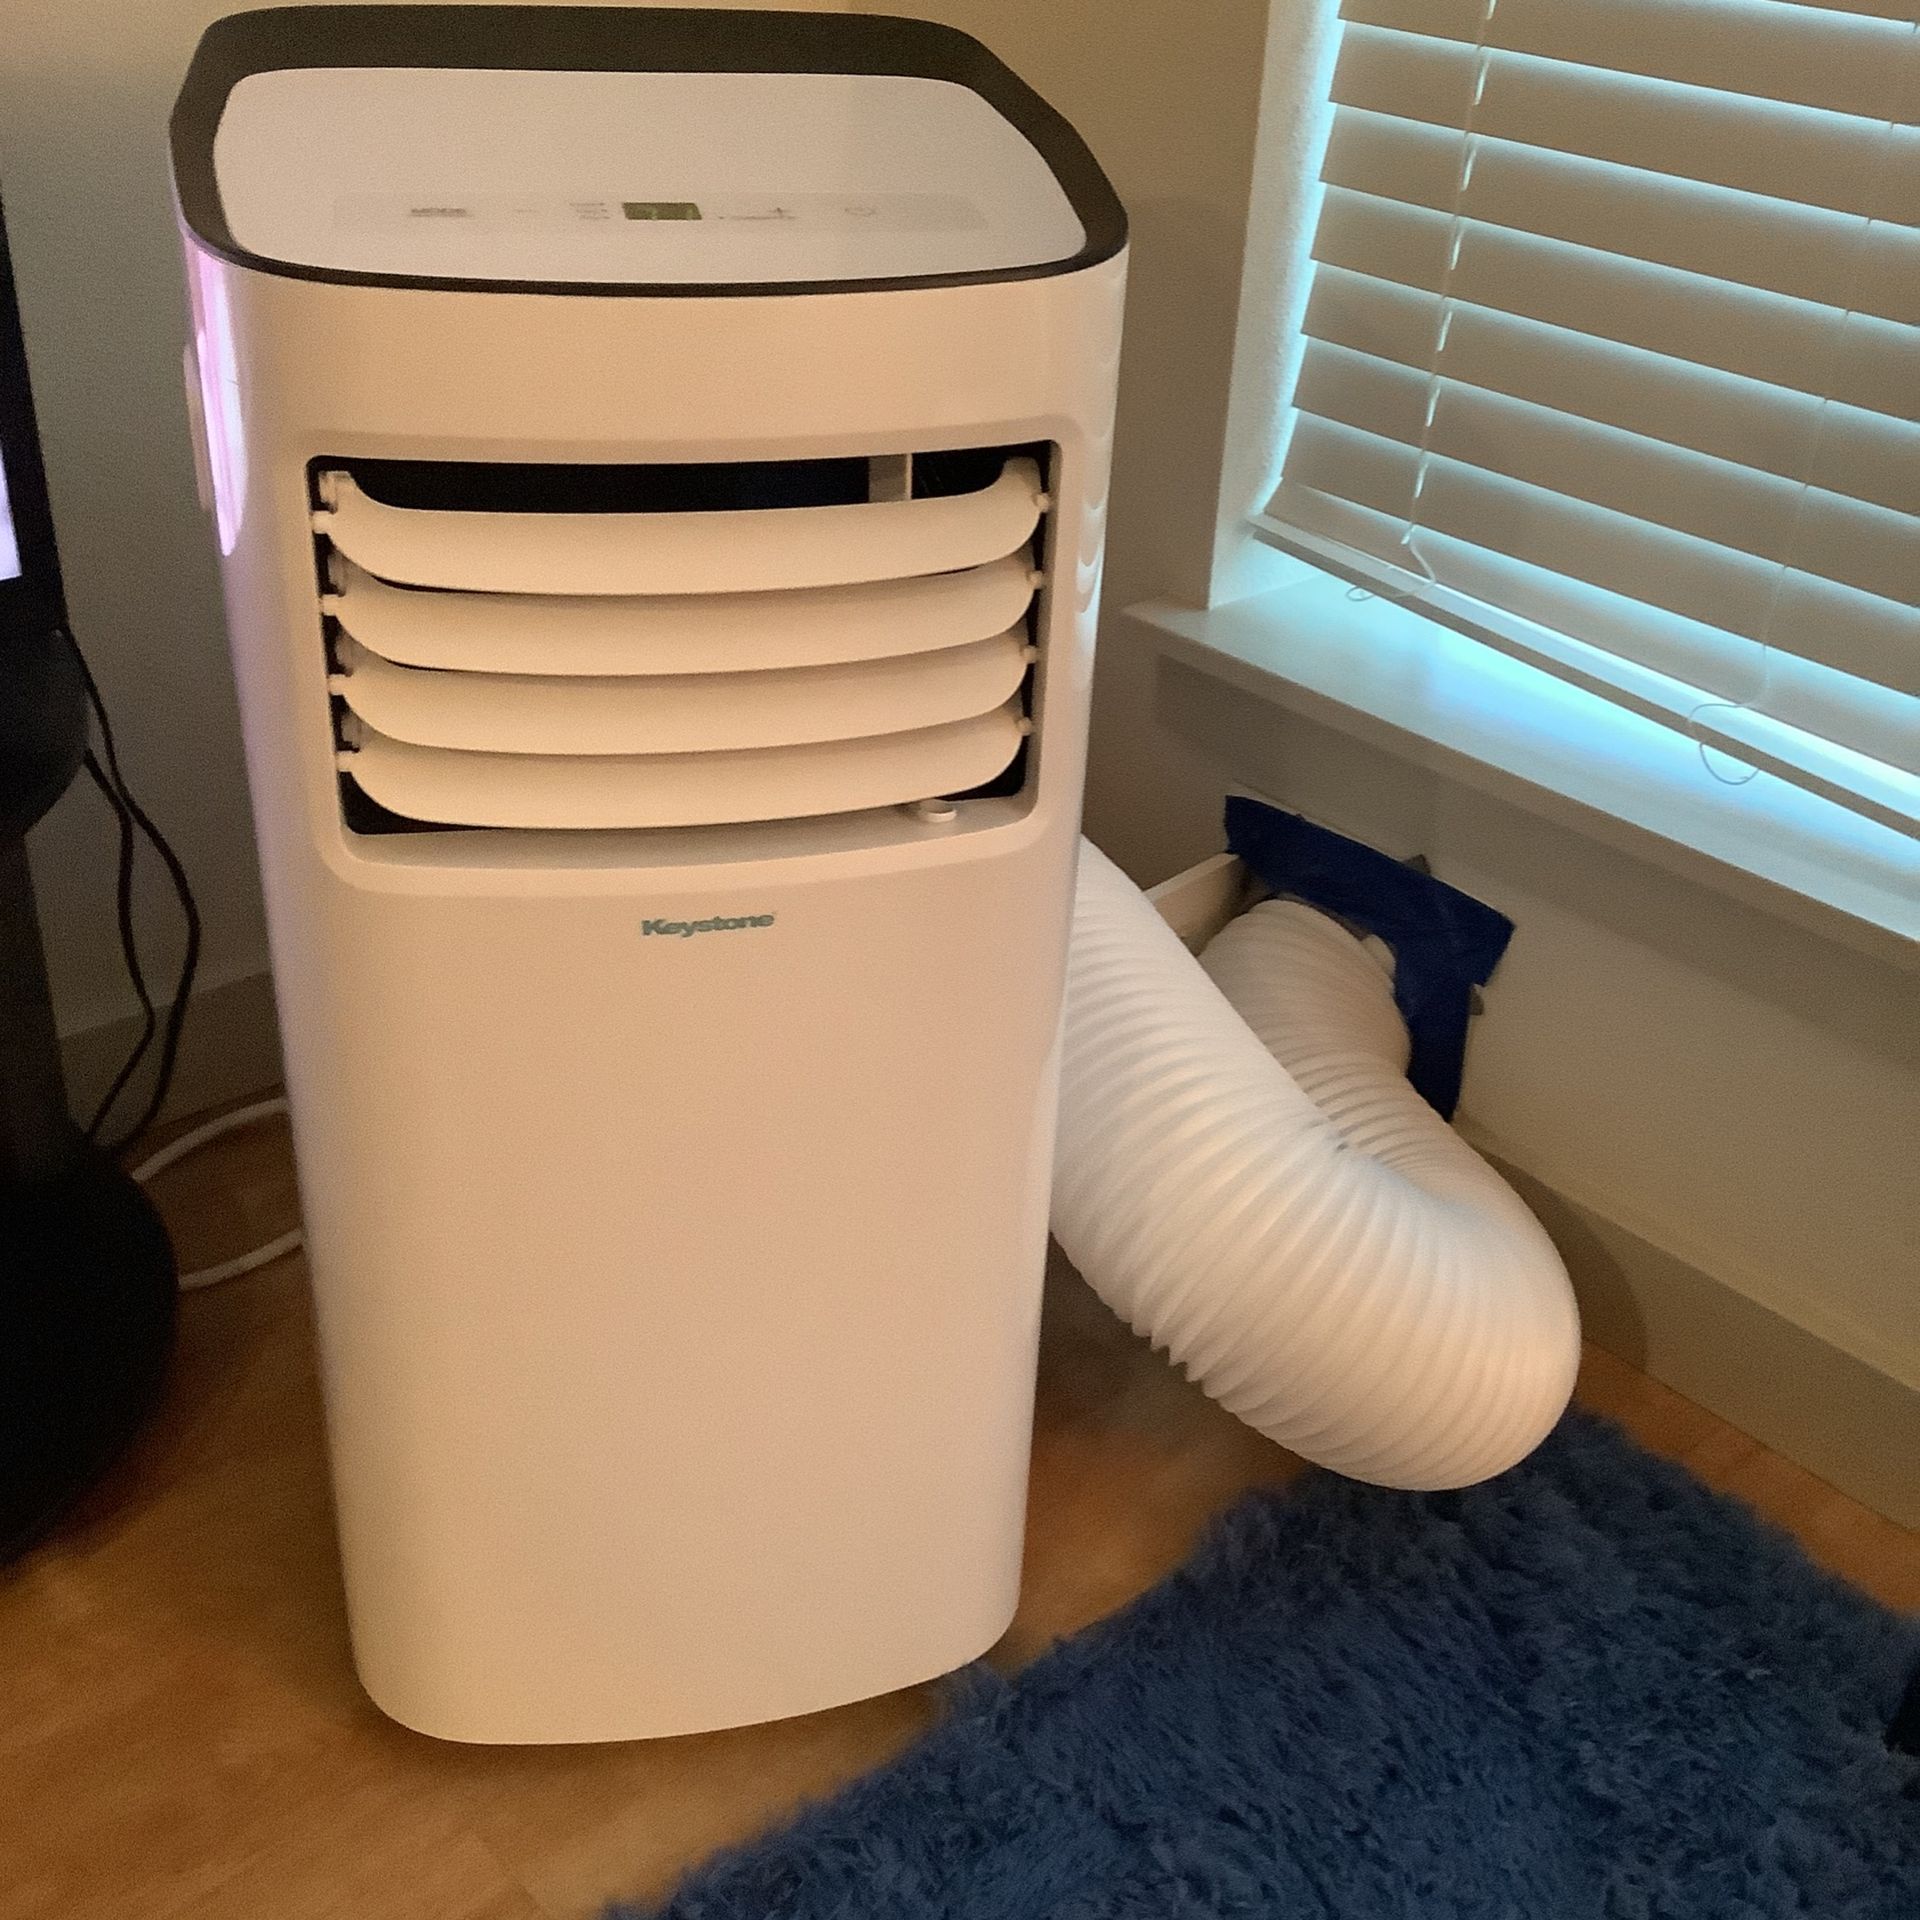 Keystone Portland Air Conditioner (less than 4 Months Old!)